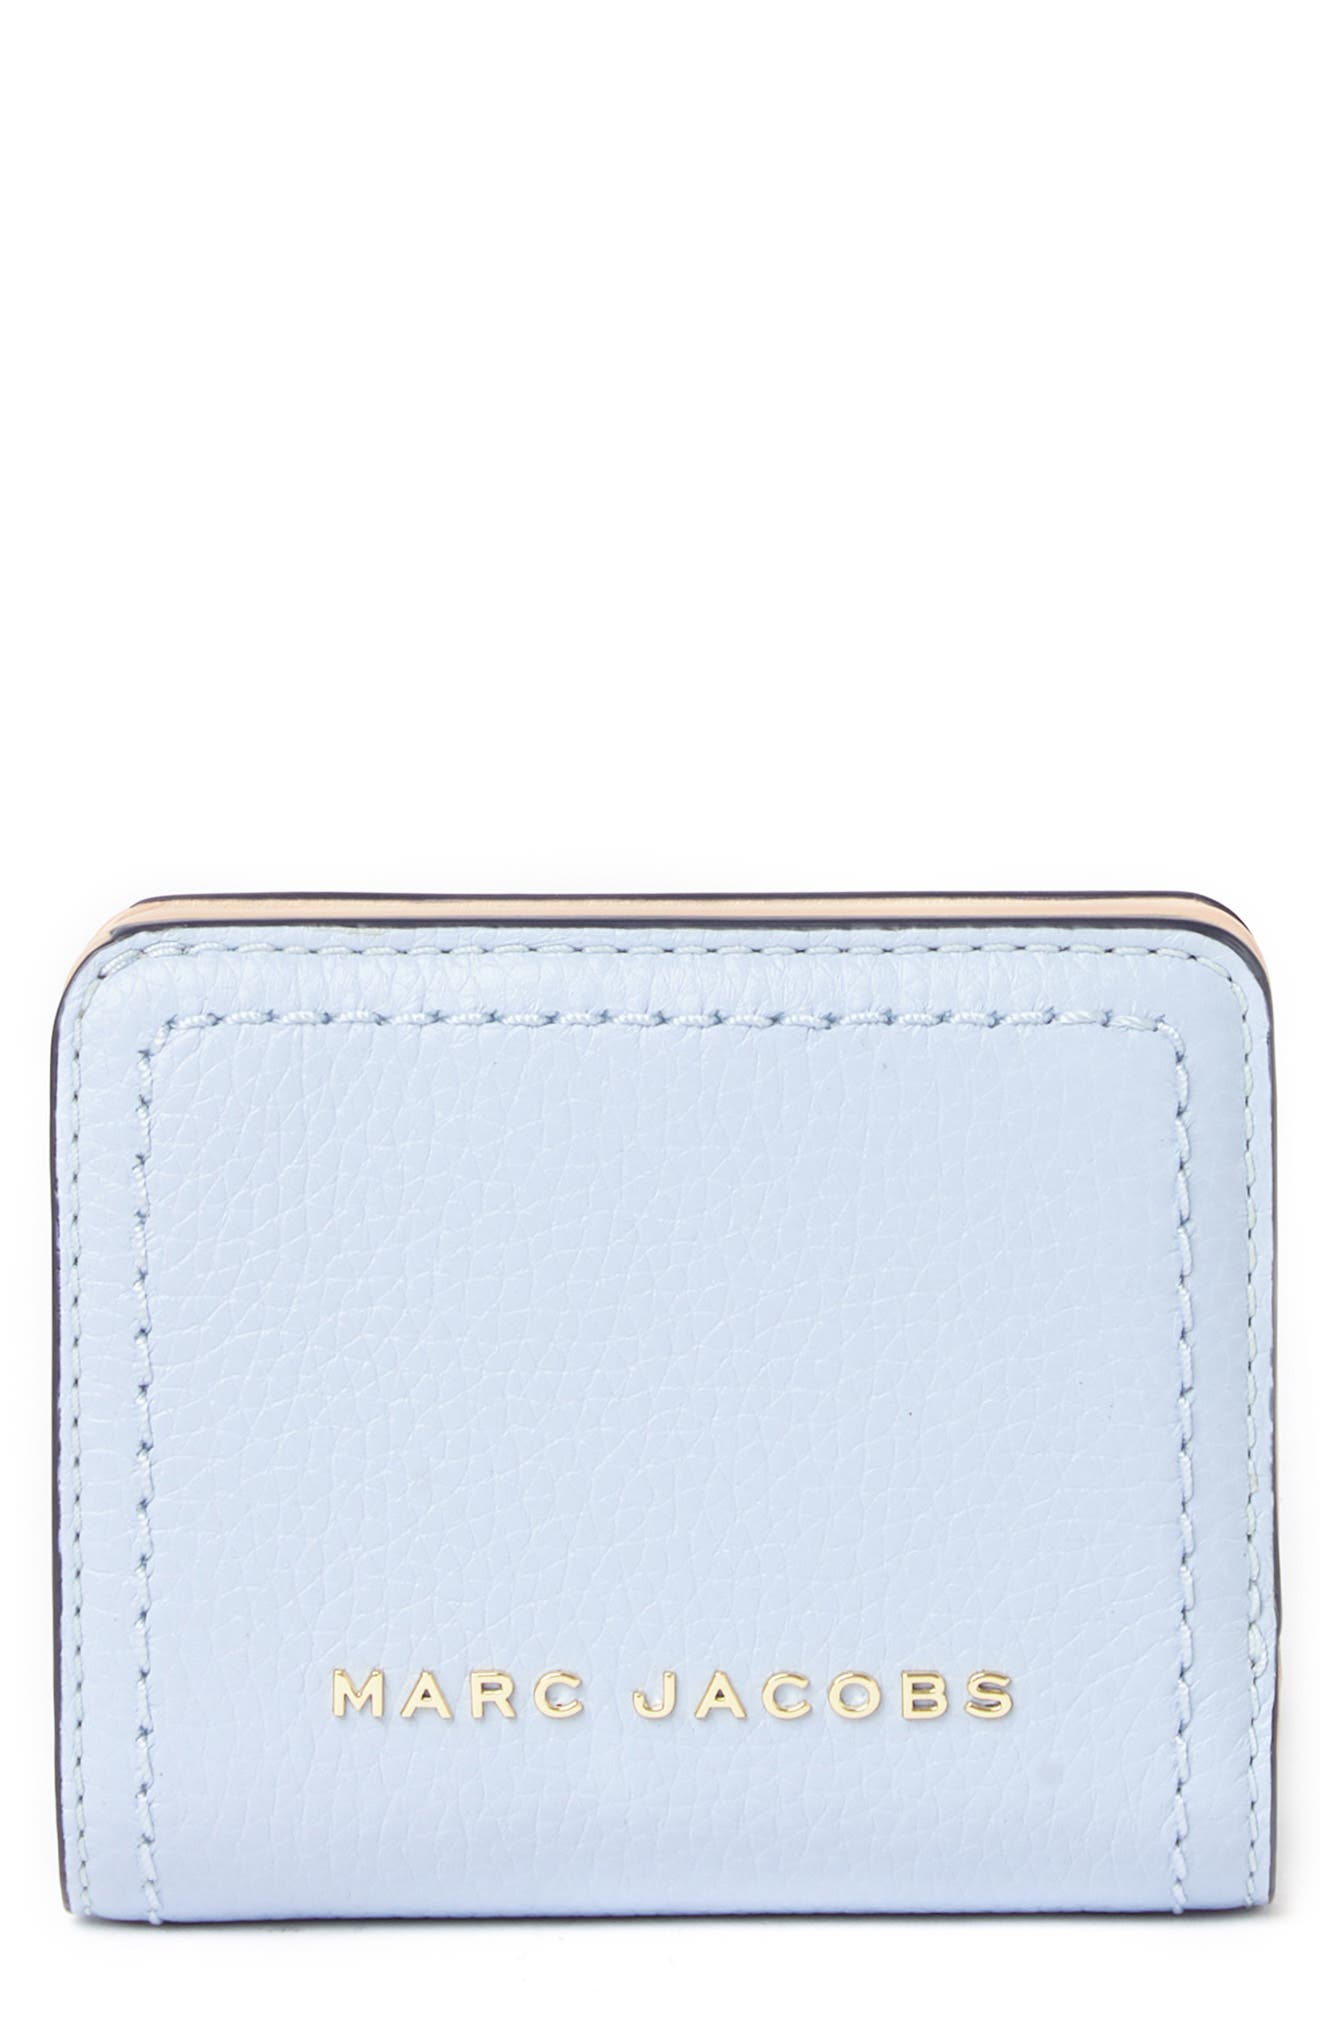 Marc Jacobs Mini Compact Wallet In Blue Mist